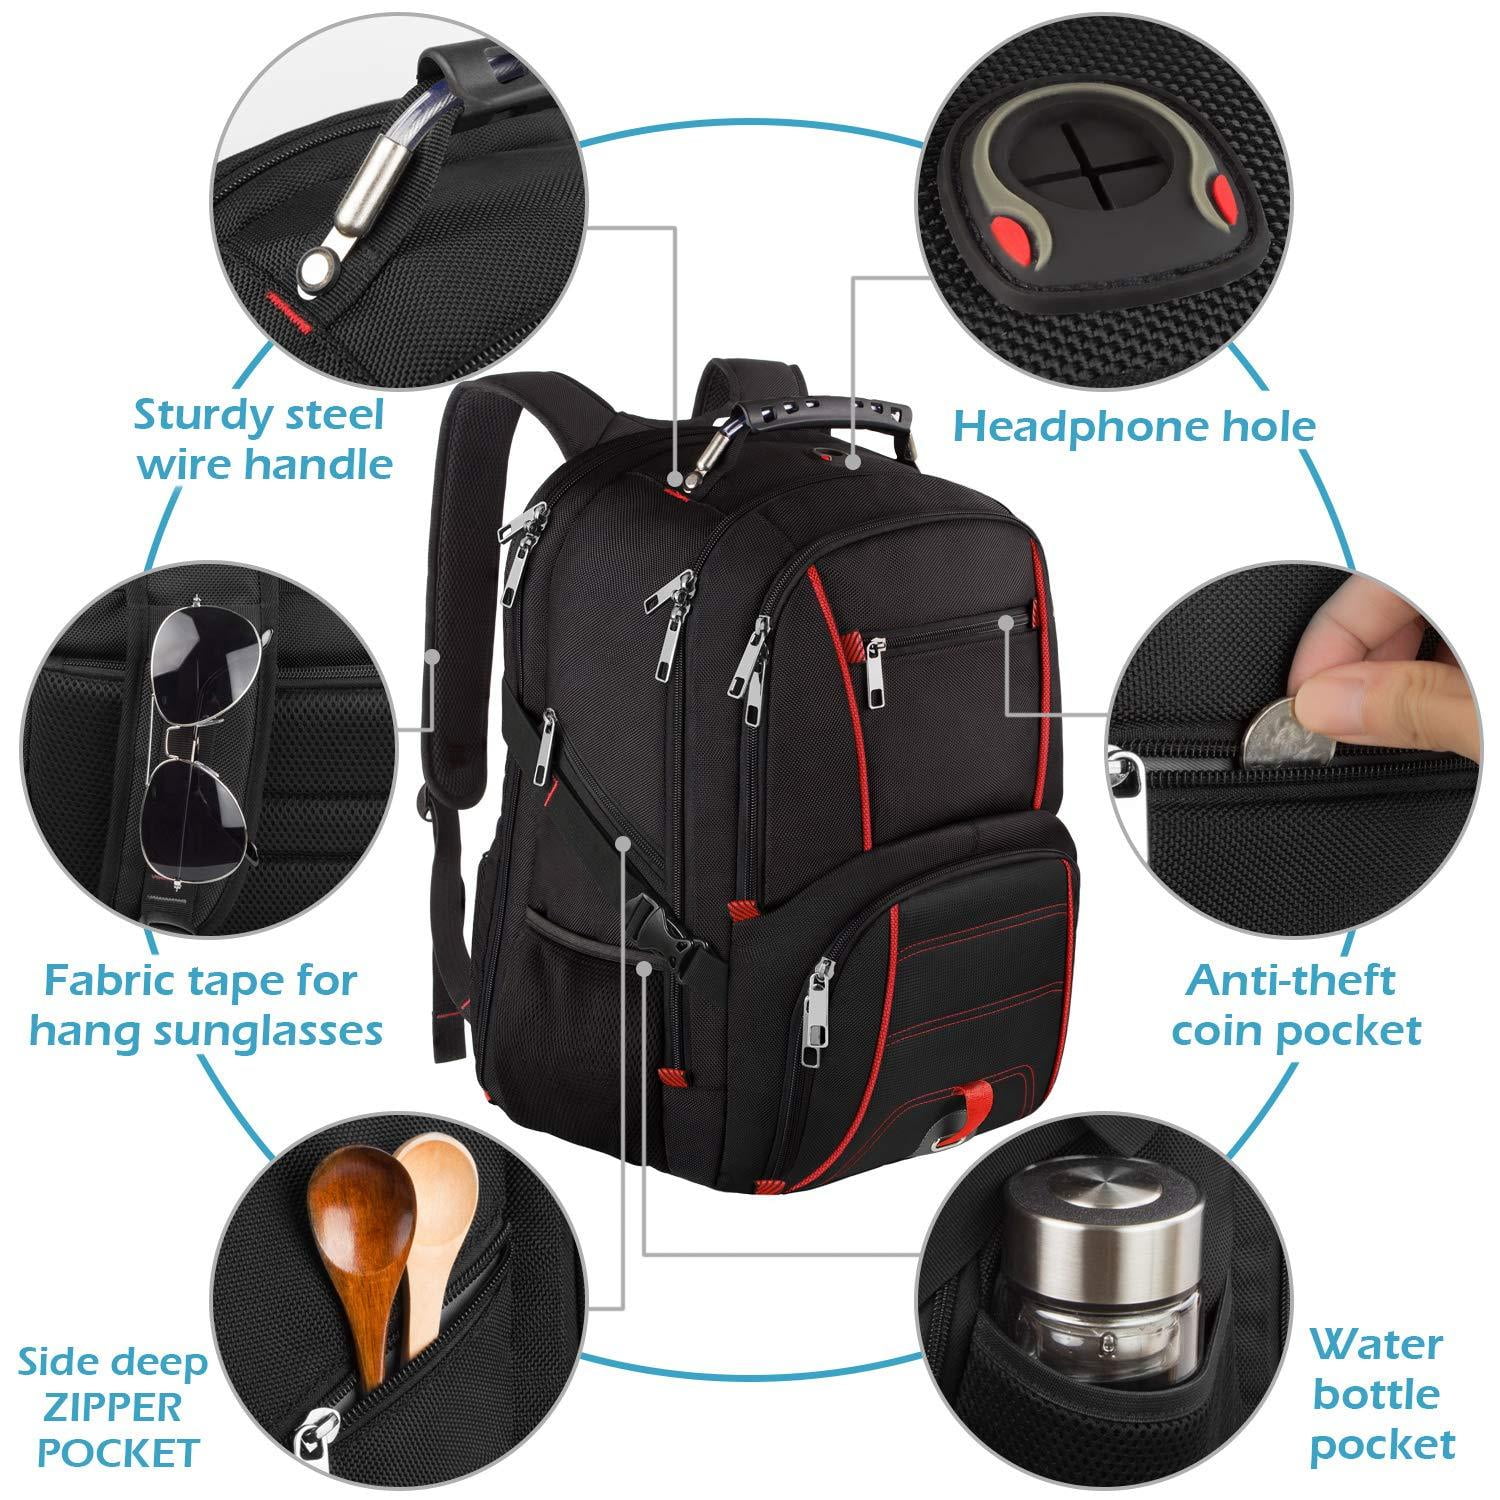 Bag with RFID Protection System Bunker Laptop Backpack School Business Travel 15.6 Water Repellent Takayama Double Padding Laptop Backpack Black 